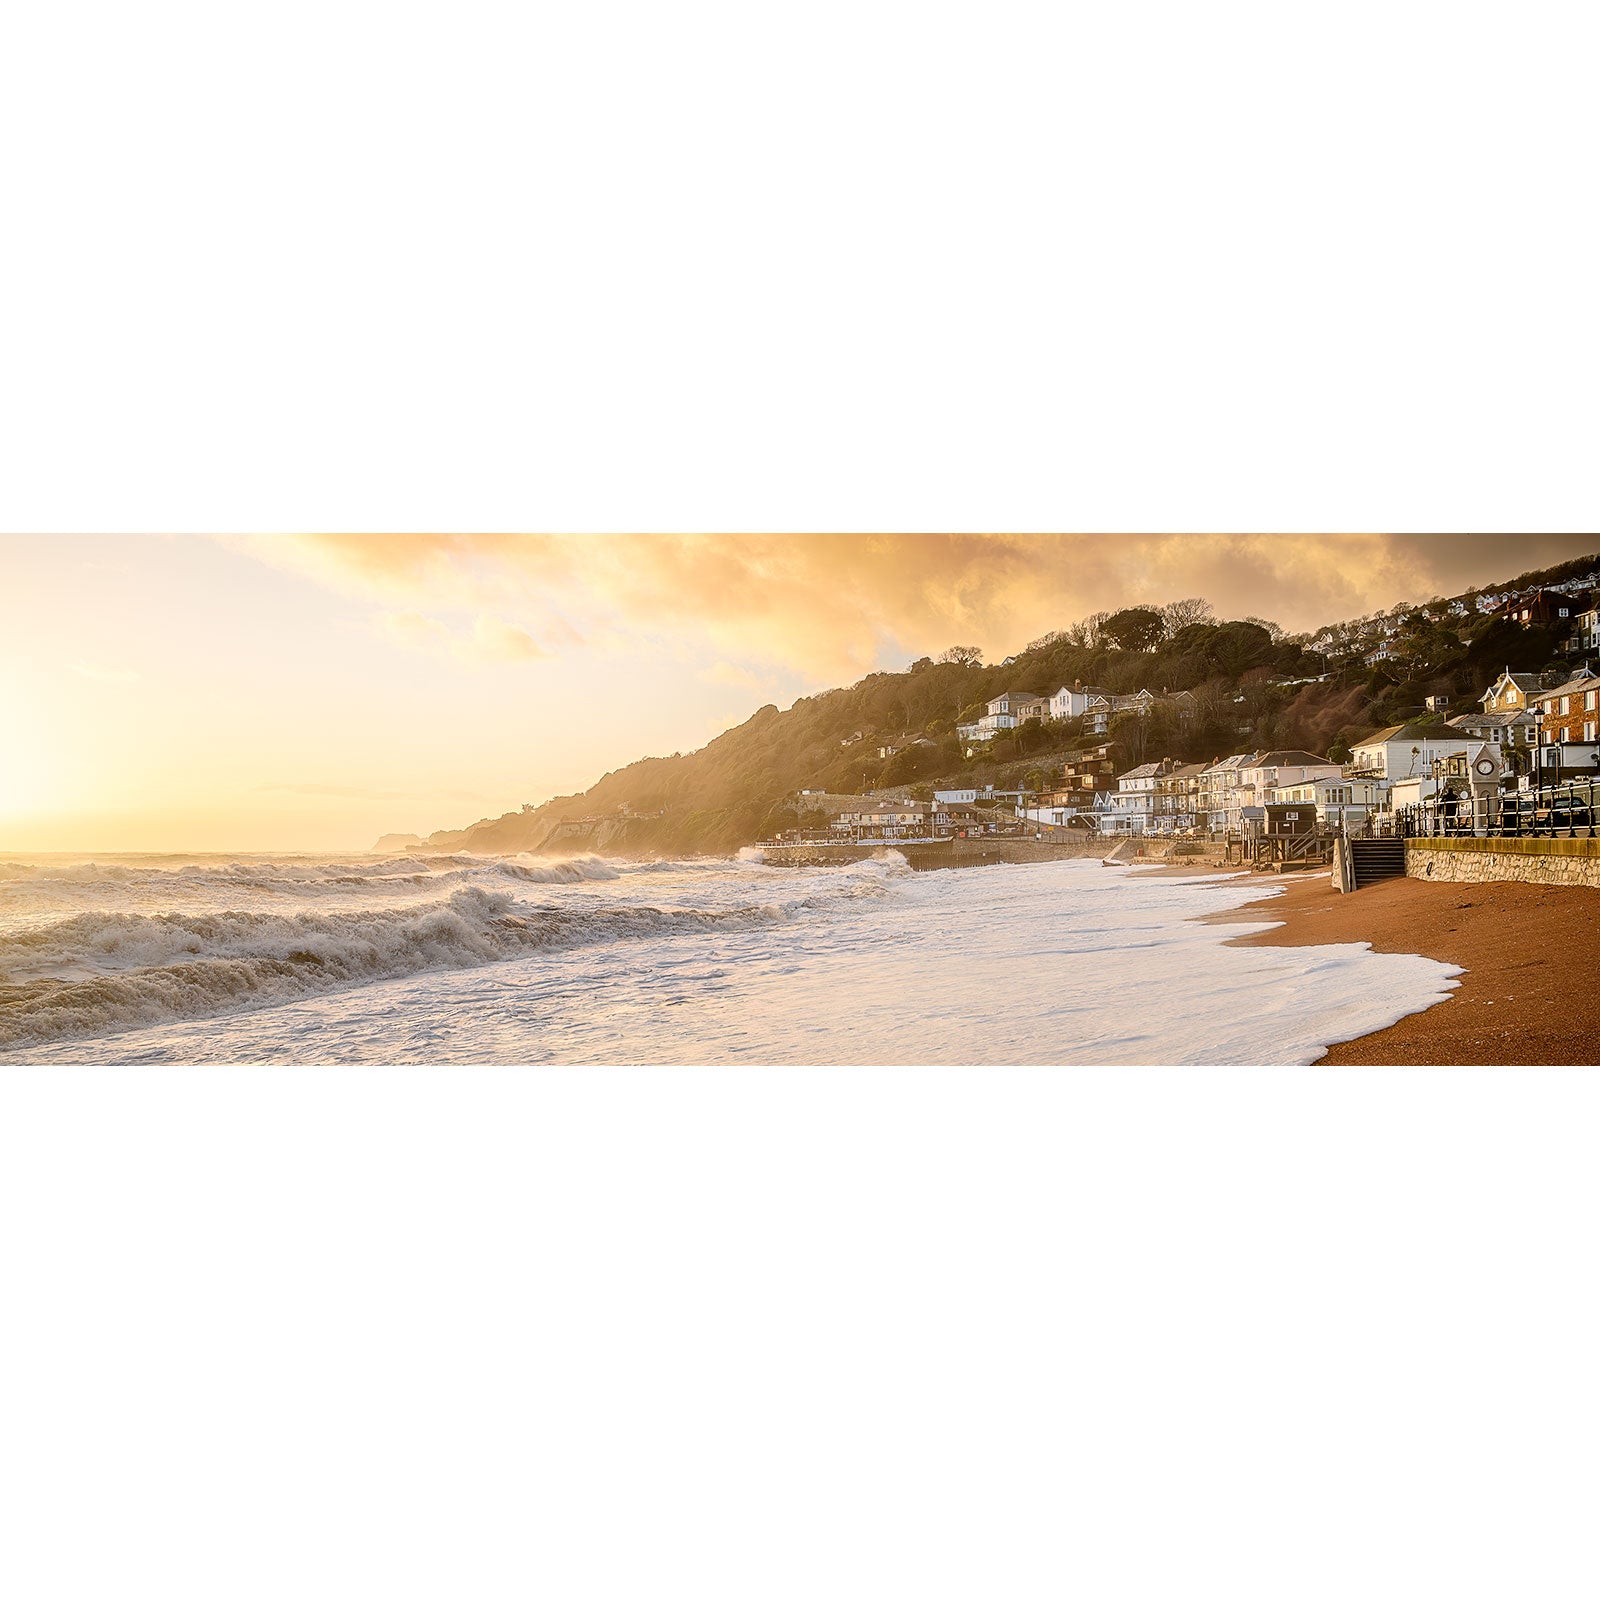 Seaside town at sunset with waves rolling onto the beach and the glow of the sun bathing the scene in warm Ventnor light from Available Light Photography.